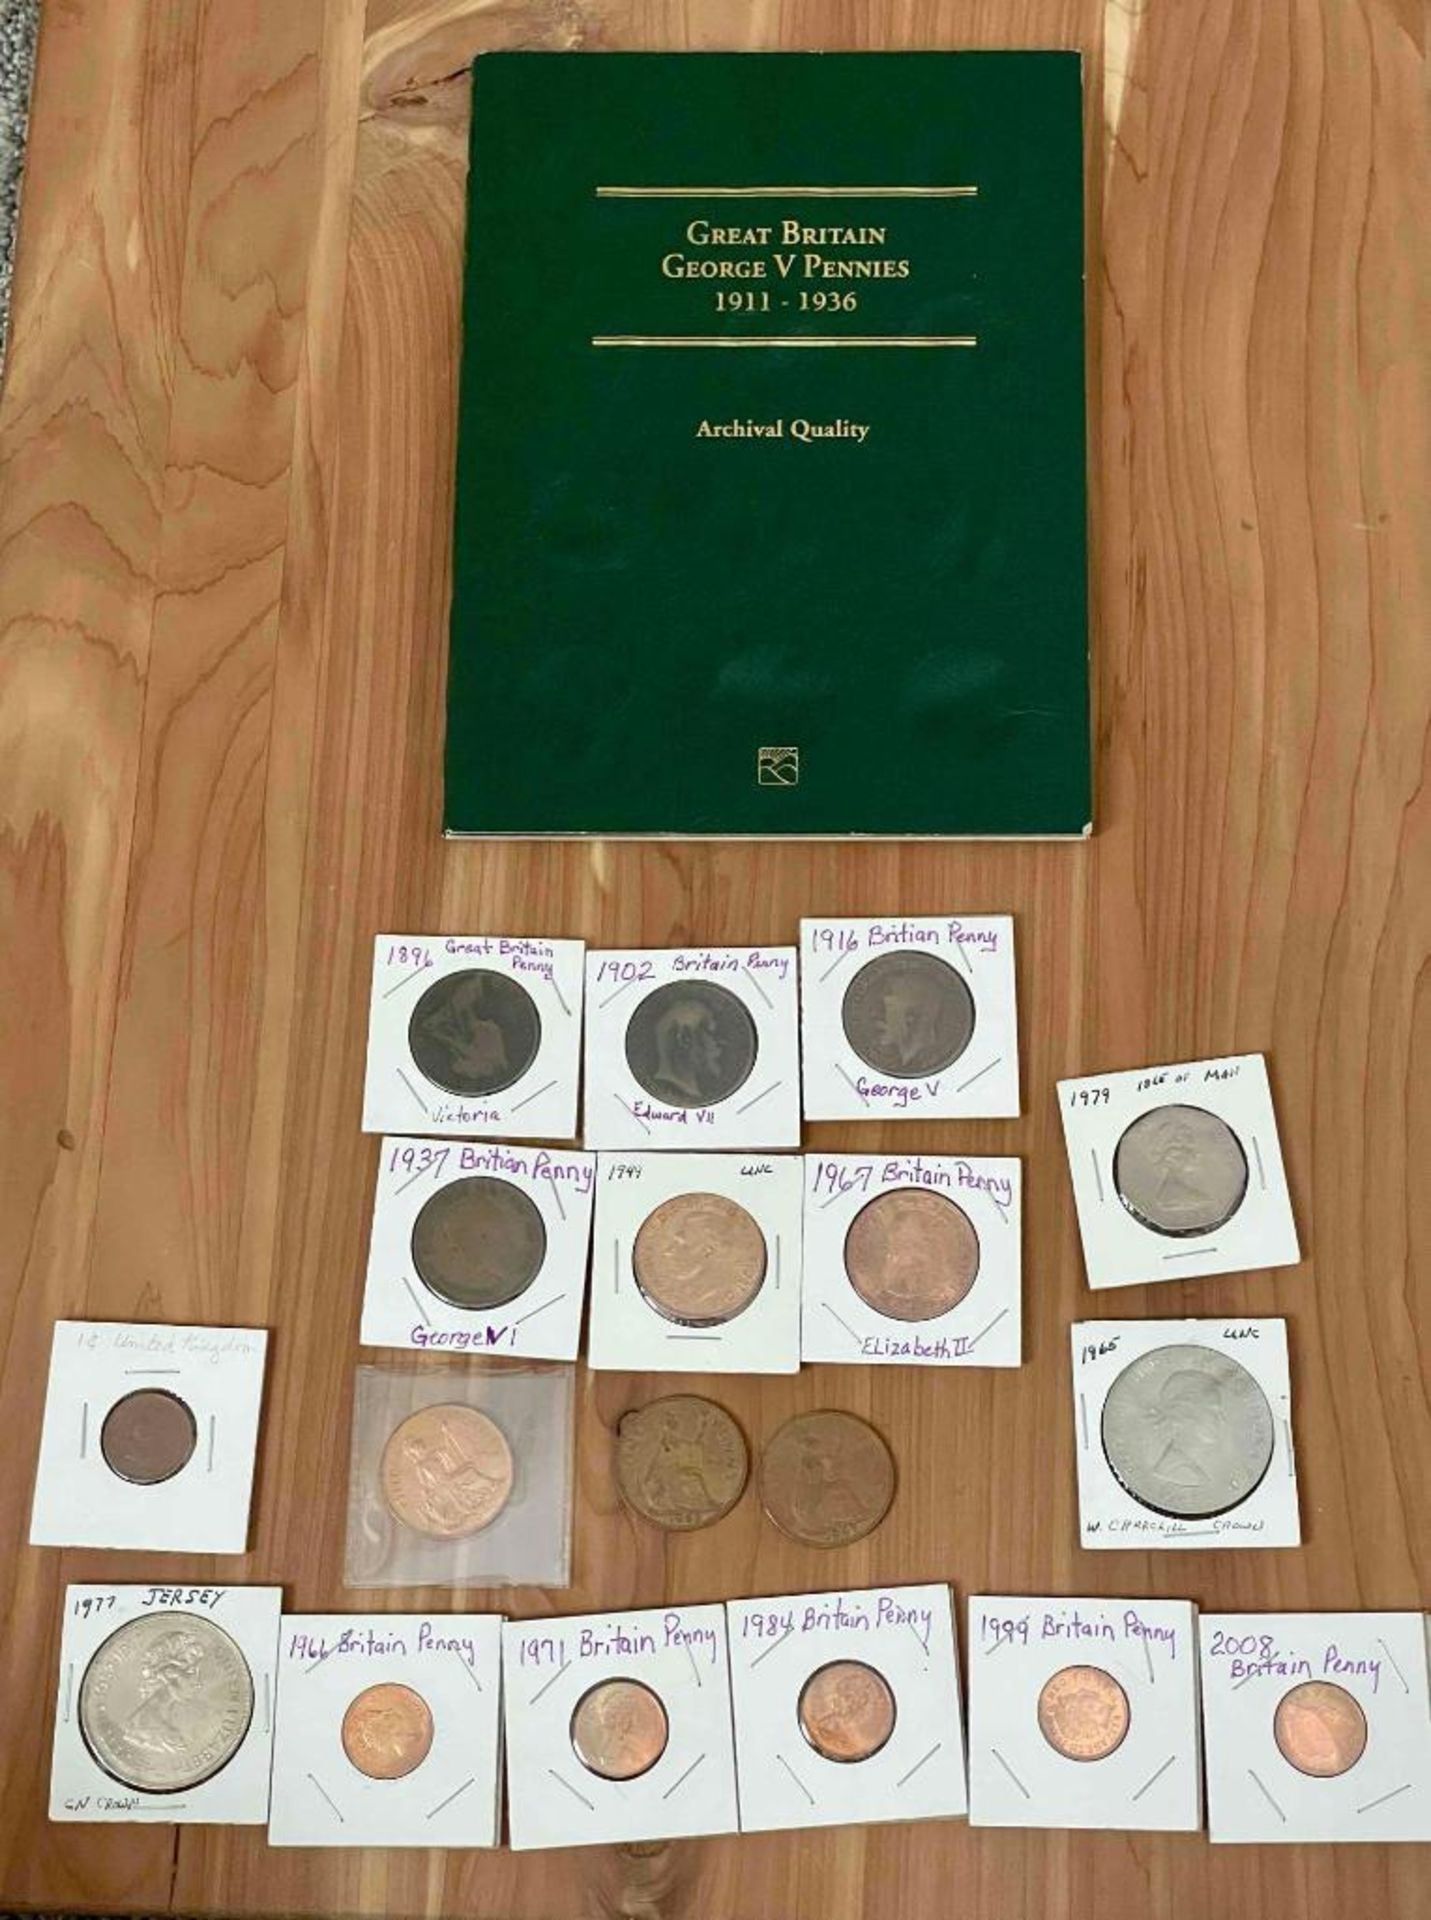 Great Britian George V Pennies 1911-1936 (1918-19 missing 4 coins), 1979 Isle of Man lifeboat, Penny